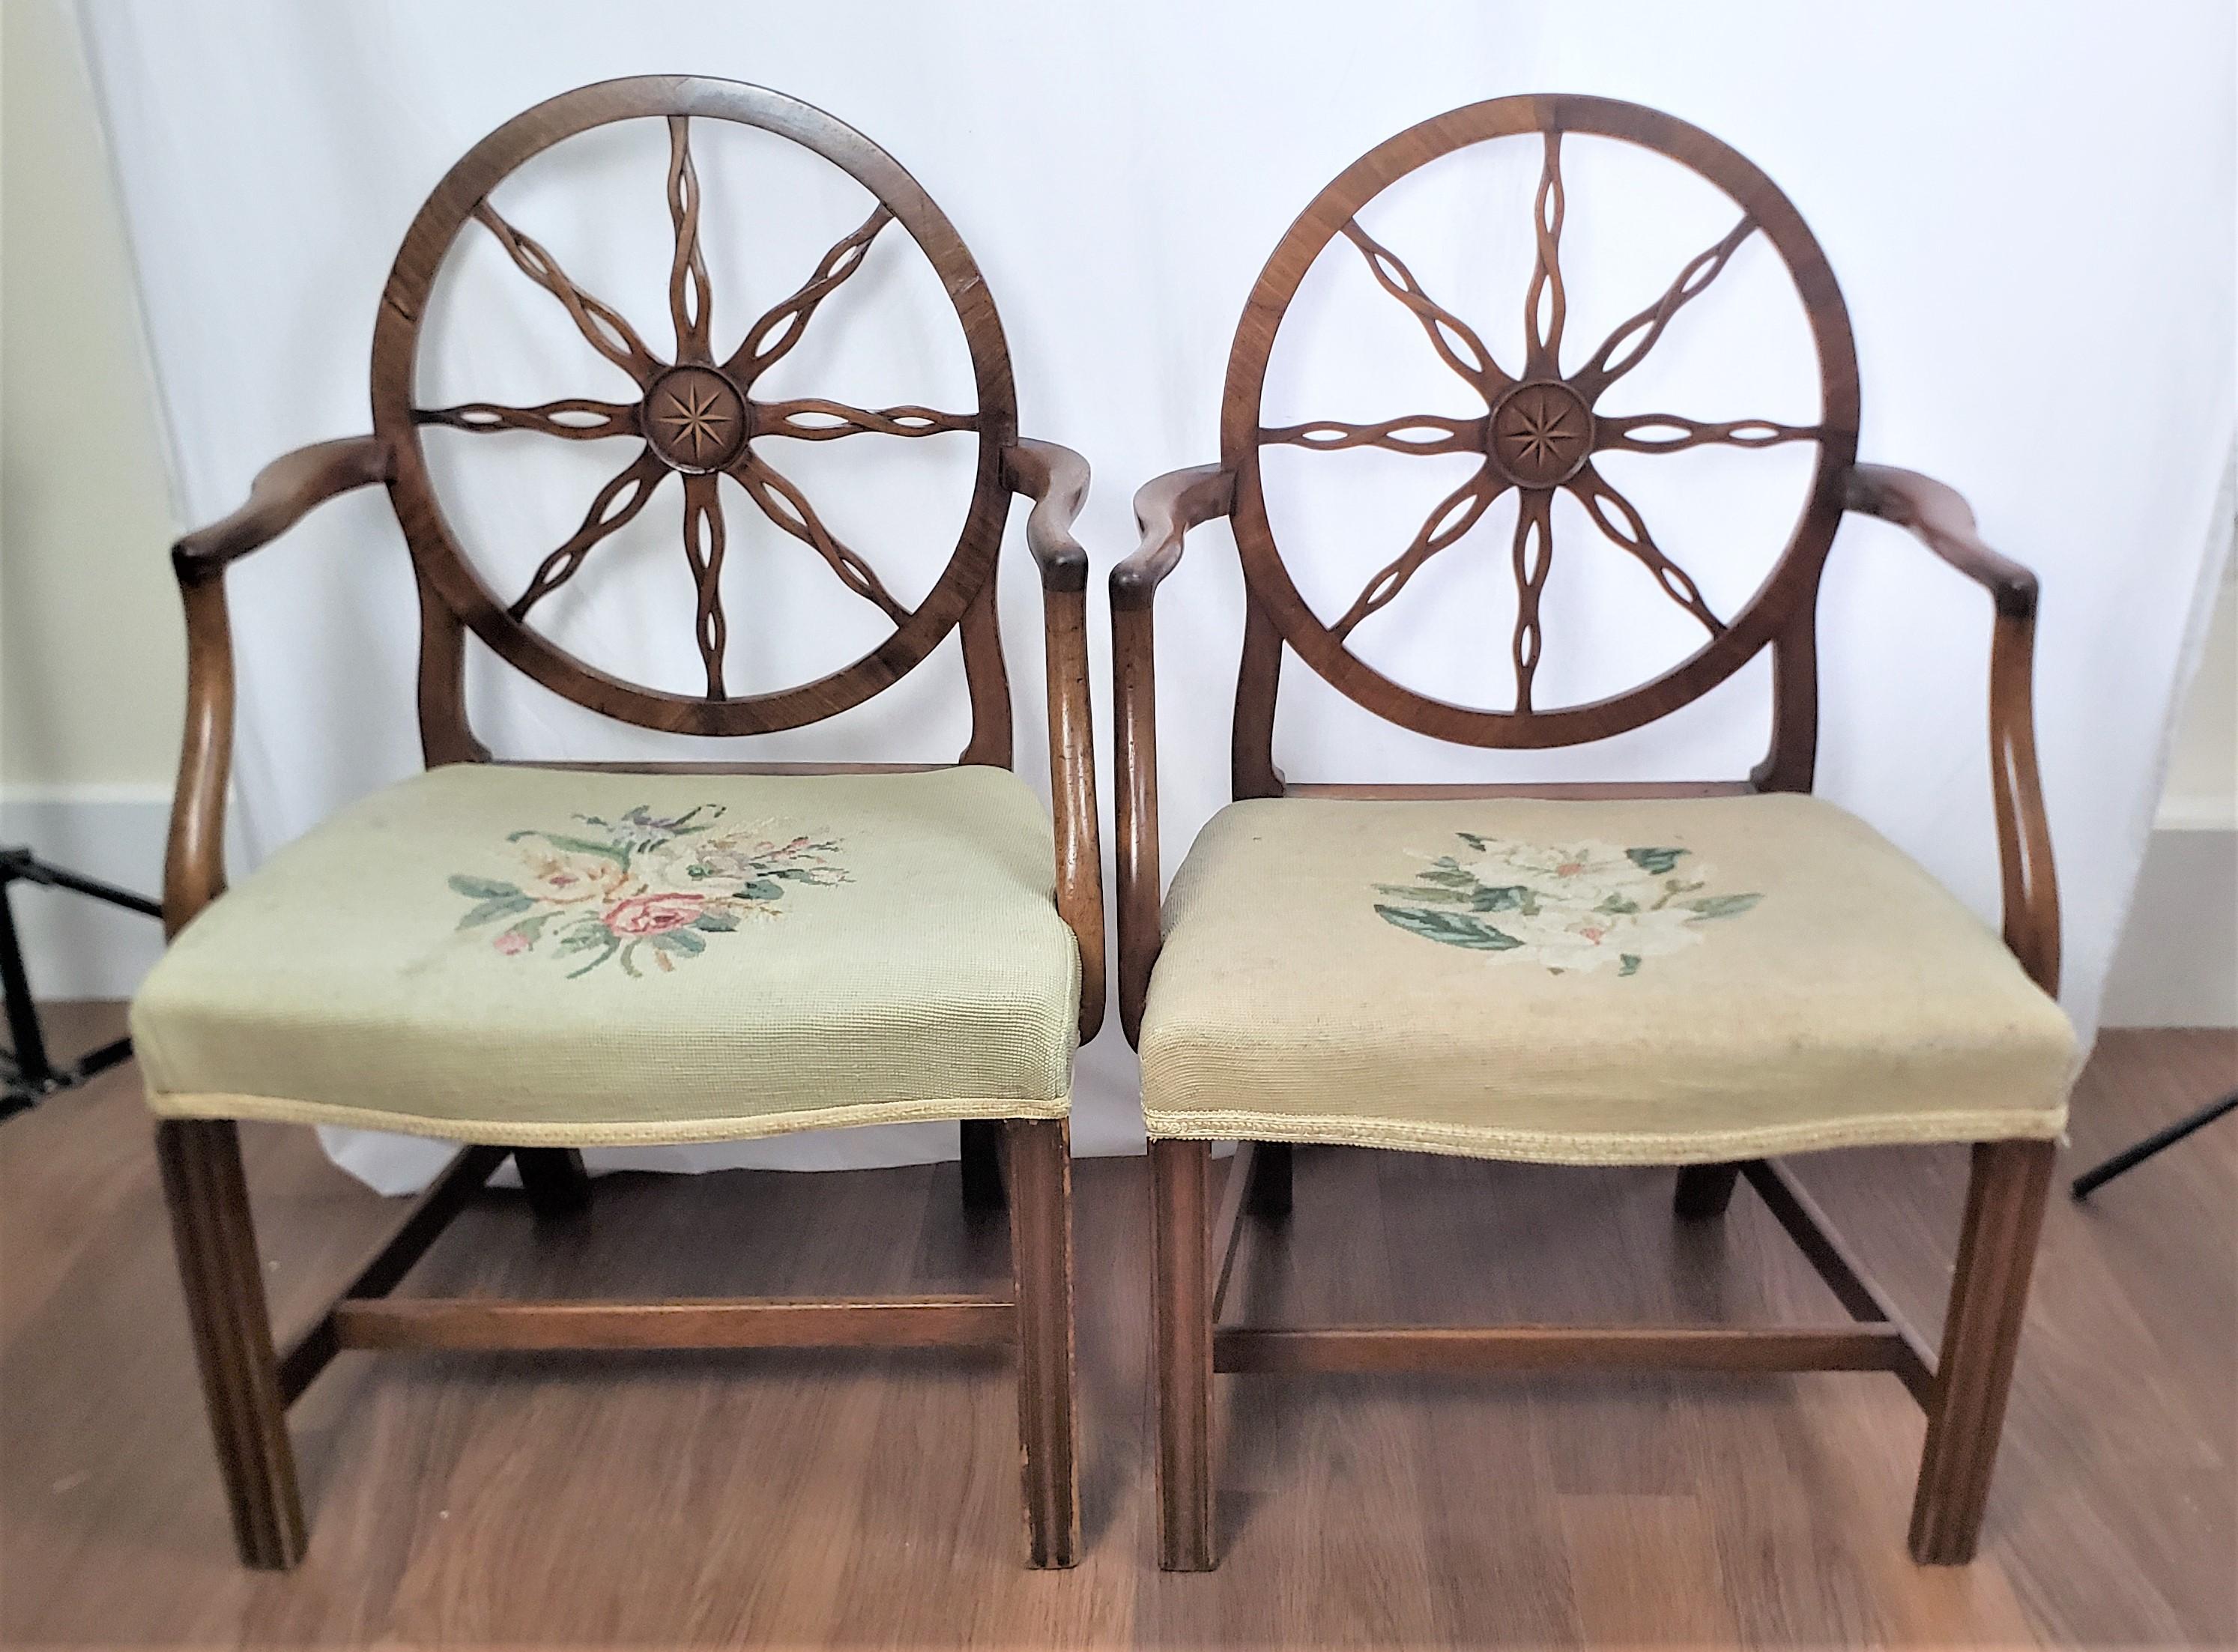 This pair of antique armchair frames are unsigned, but presumed to have originated from England and date to approximately 1790 and done in the period King George III style. The chairs are composed of walnut and feature a large spoked wheel back with